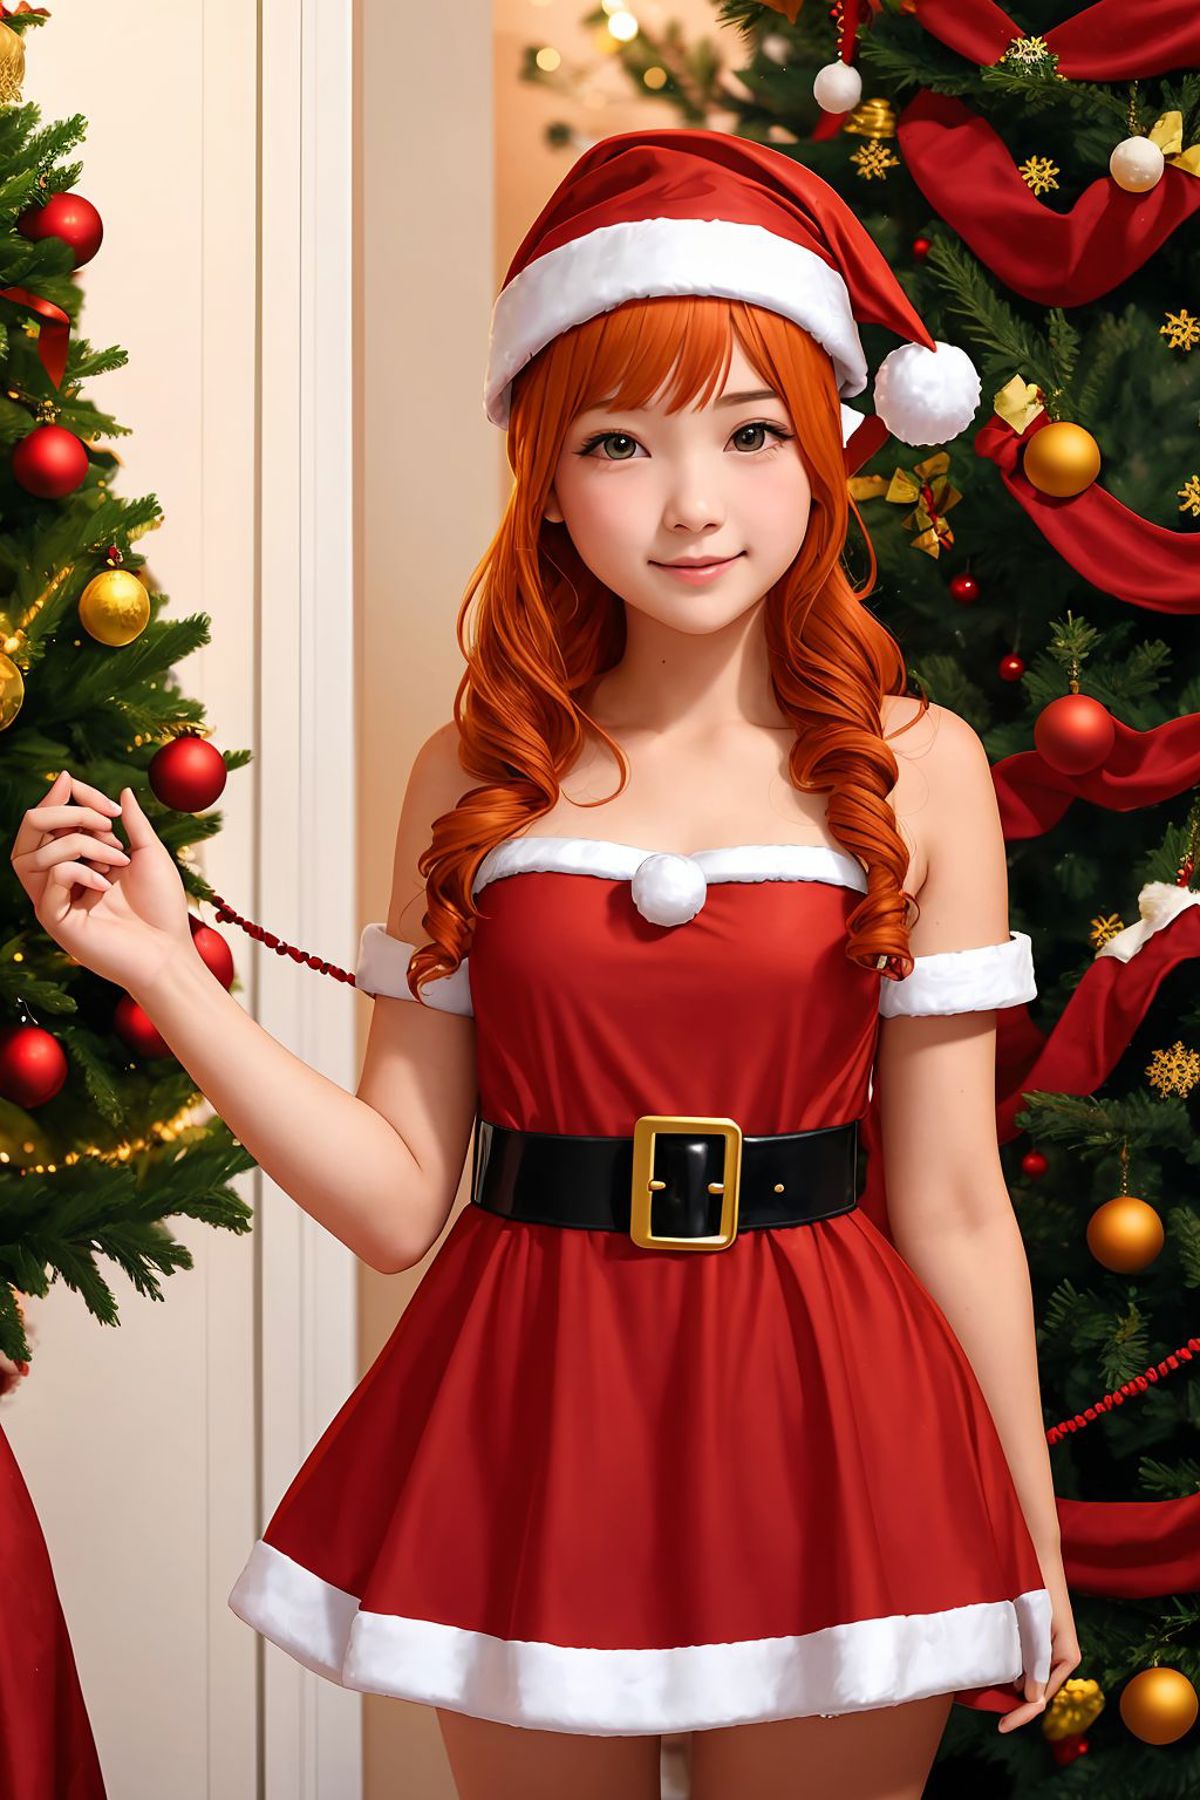 Christmas Dress image by Montitto